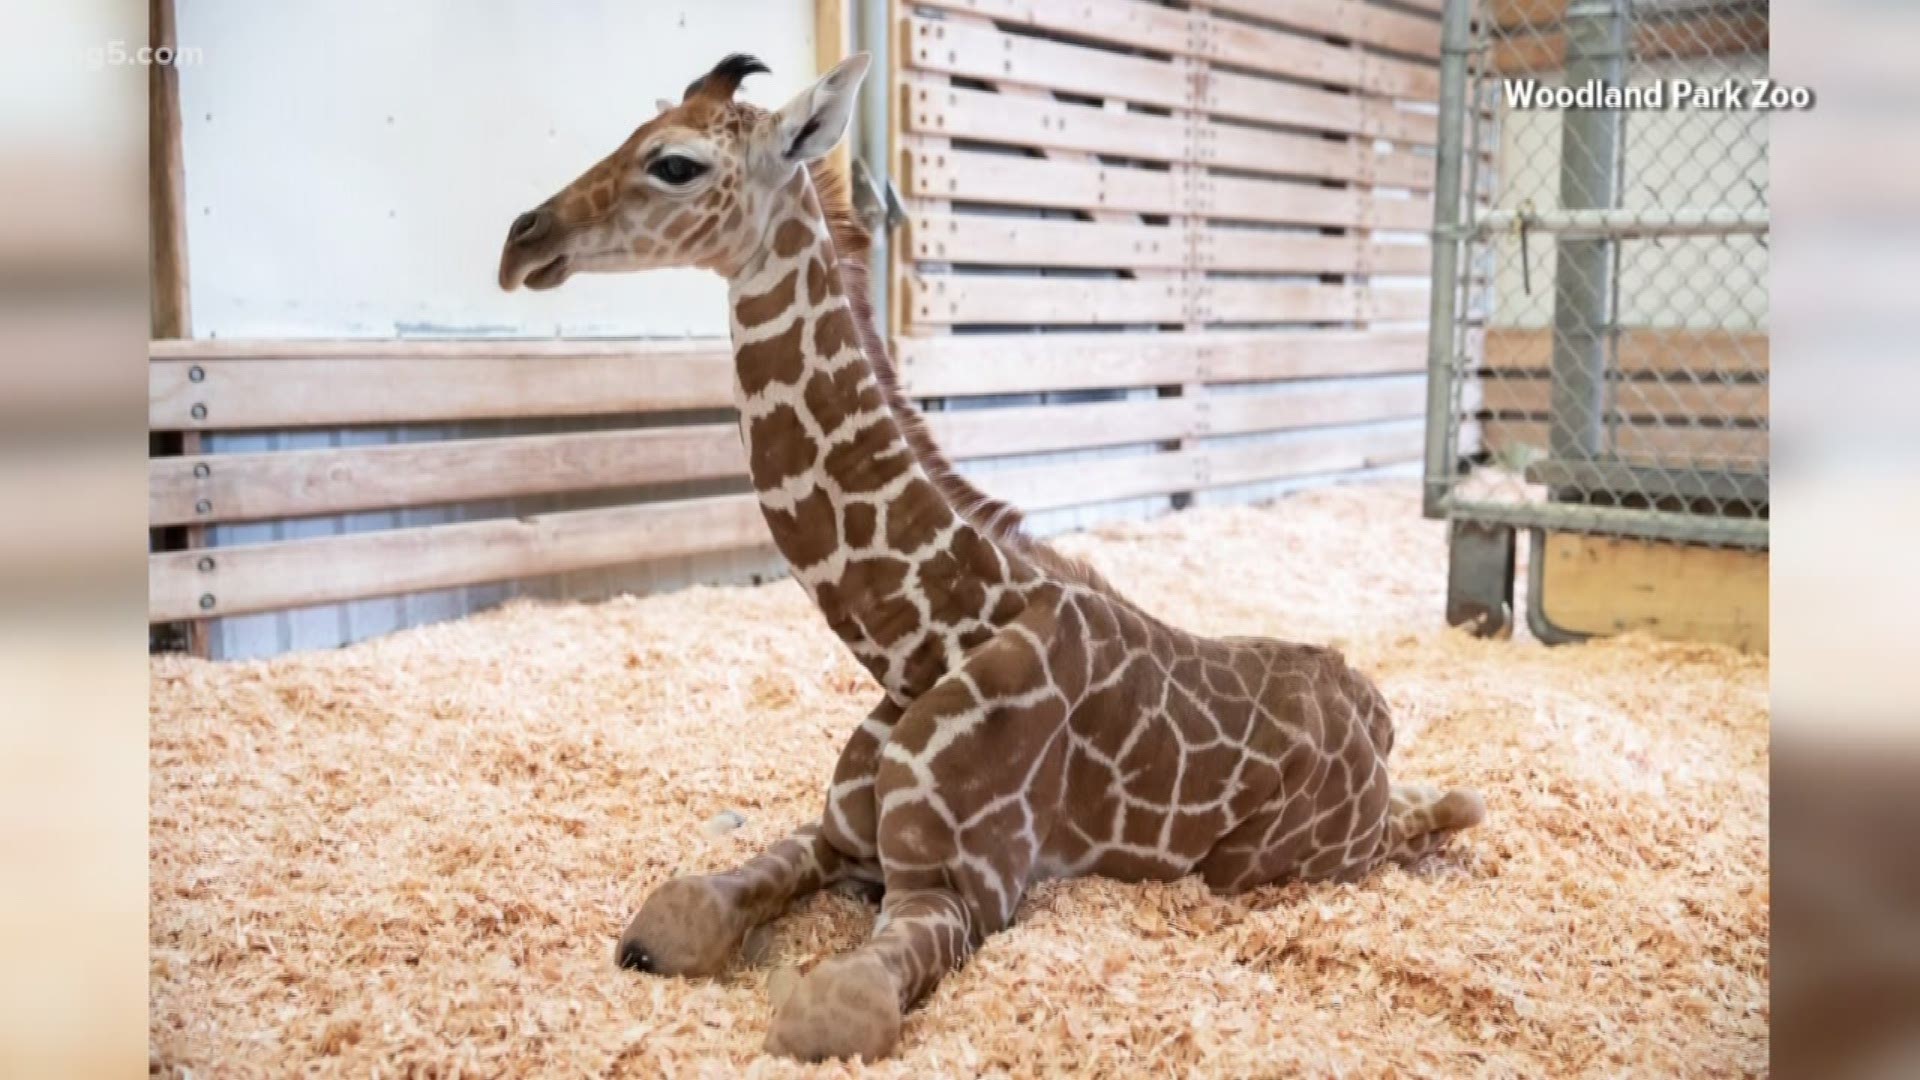 We have an update on the baby giraffe born at Woodland Park Zoo. KING 5's Greg Copeland has the details.